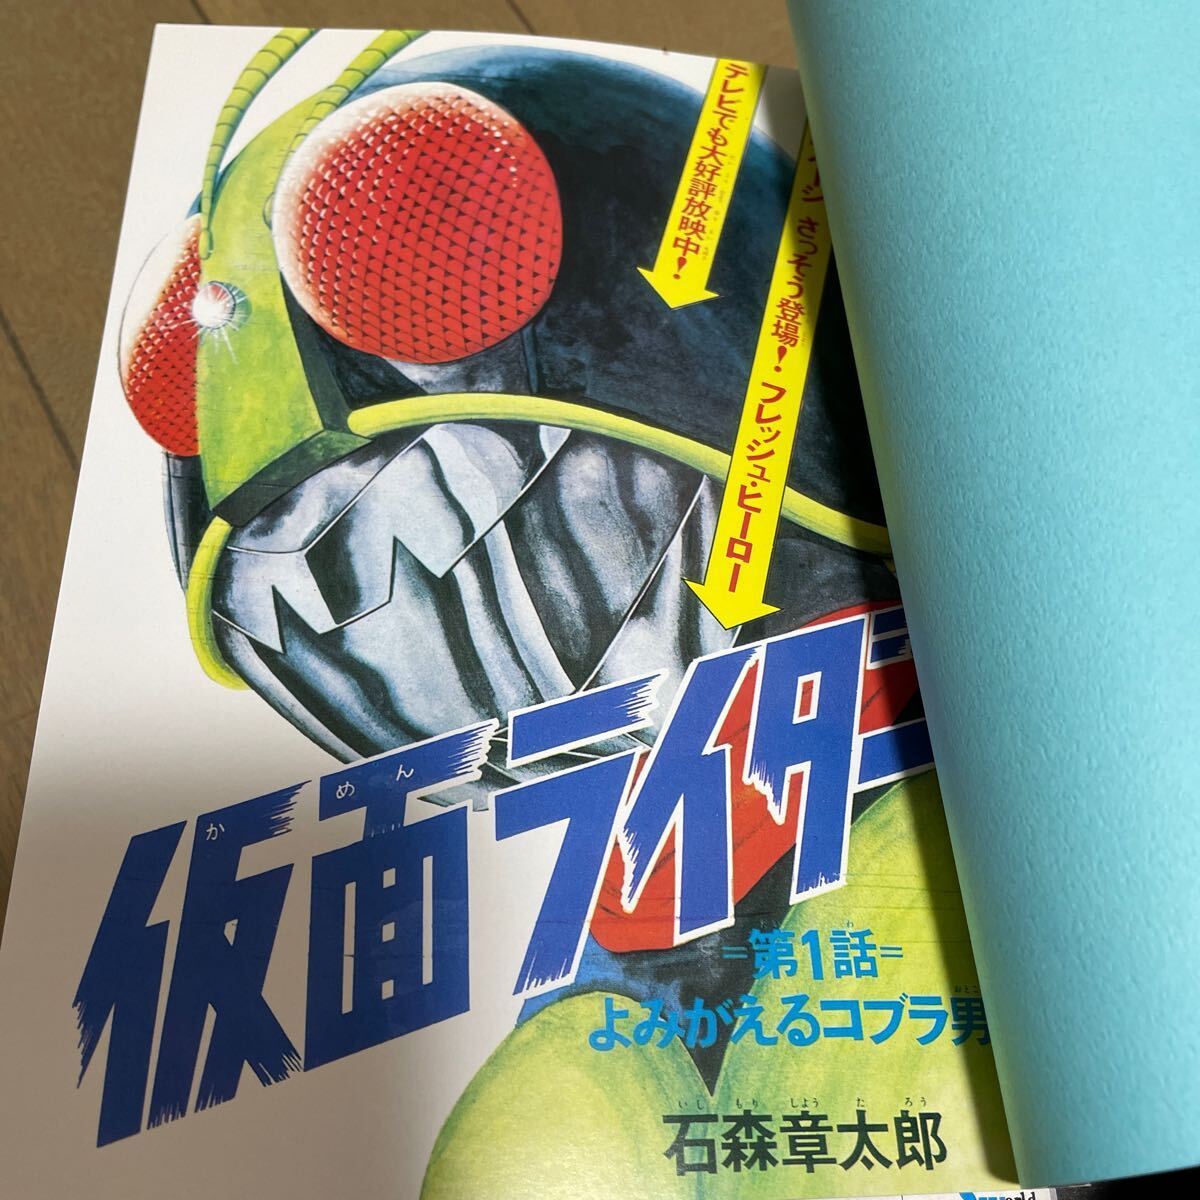  Kamen Rider all 3 volume the first version with belt stone forest chapter Taro S hotaroWorld Media Factory convex version printing 